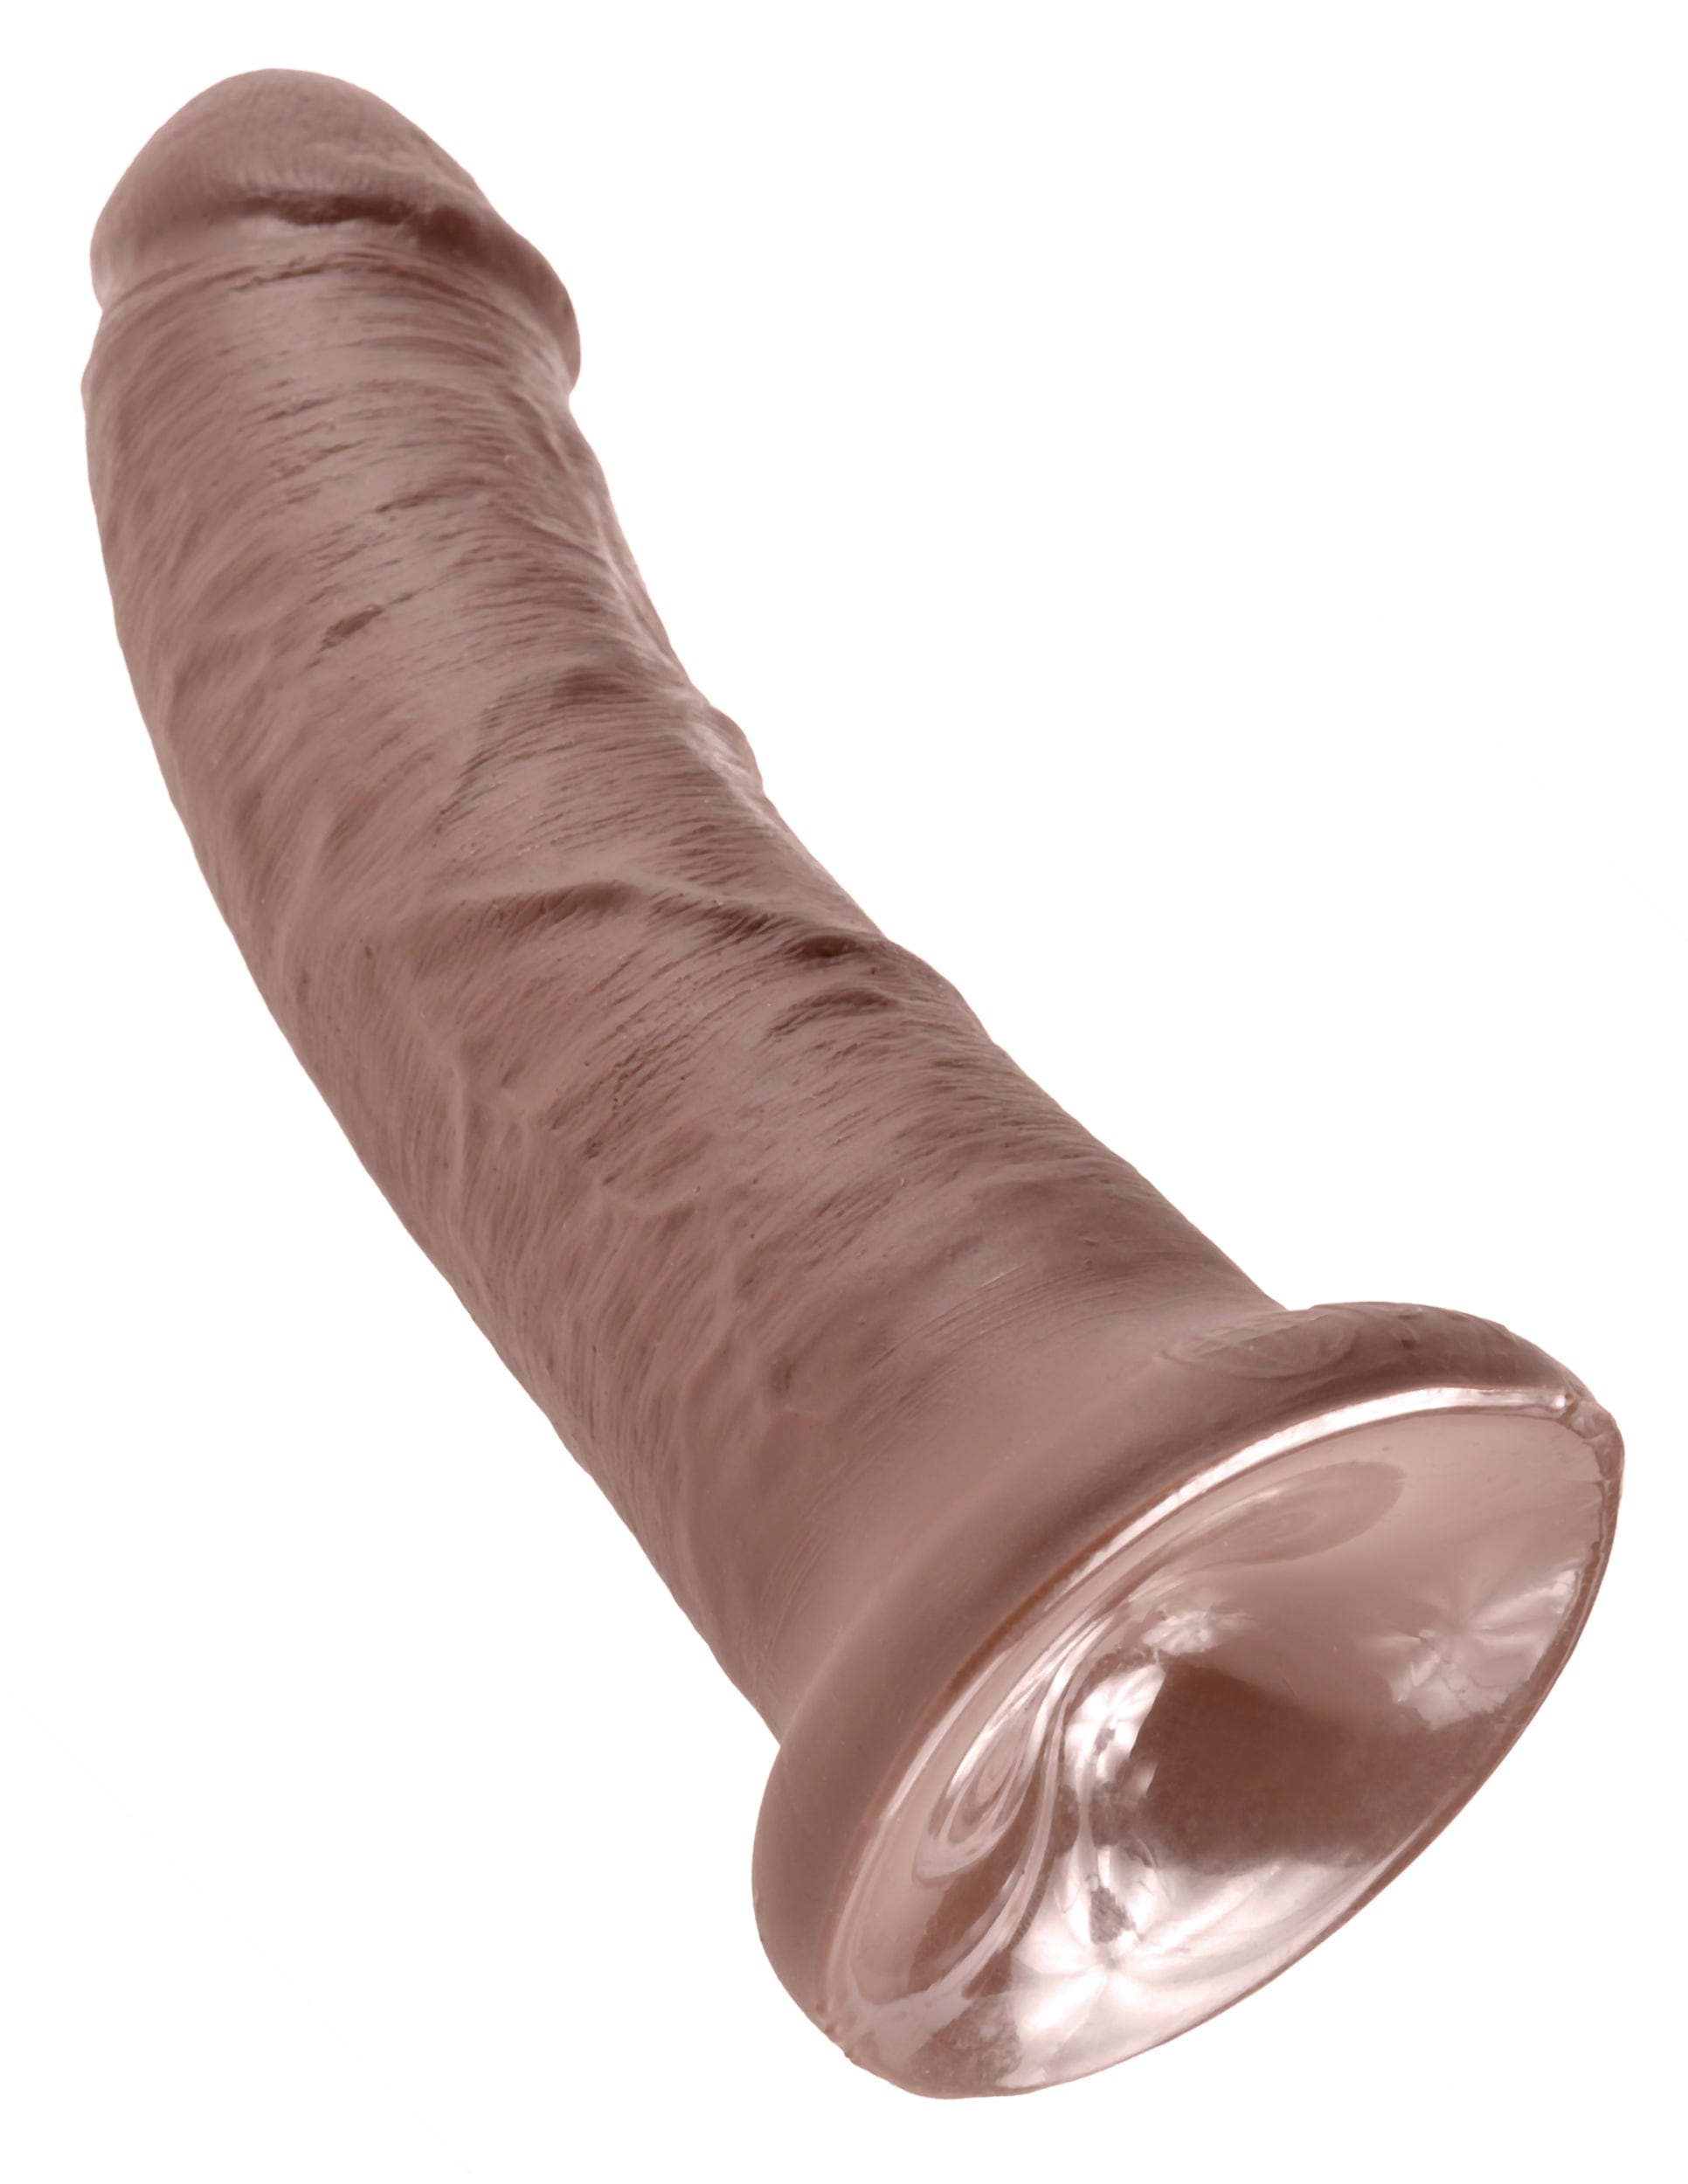 8" COCK - BROWN